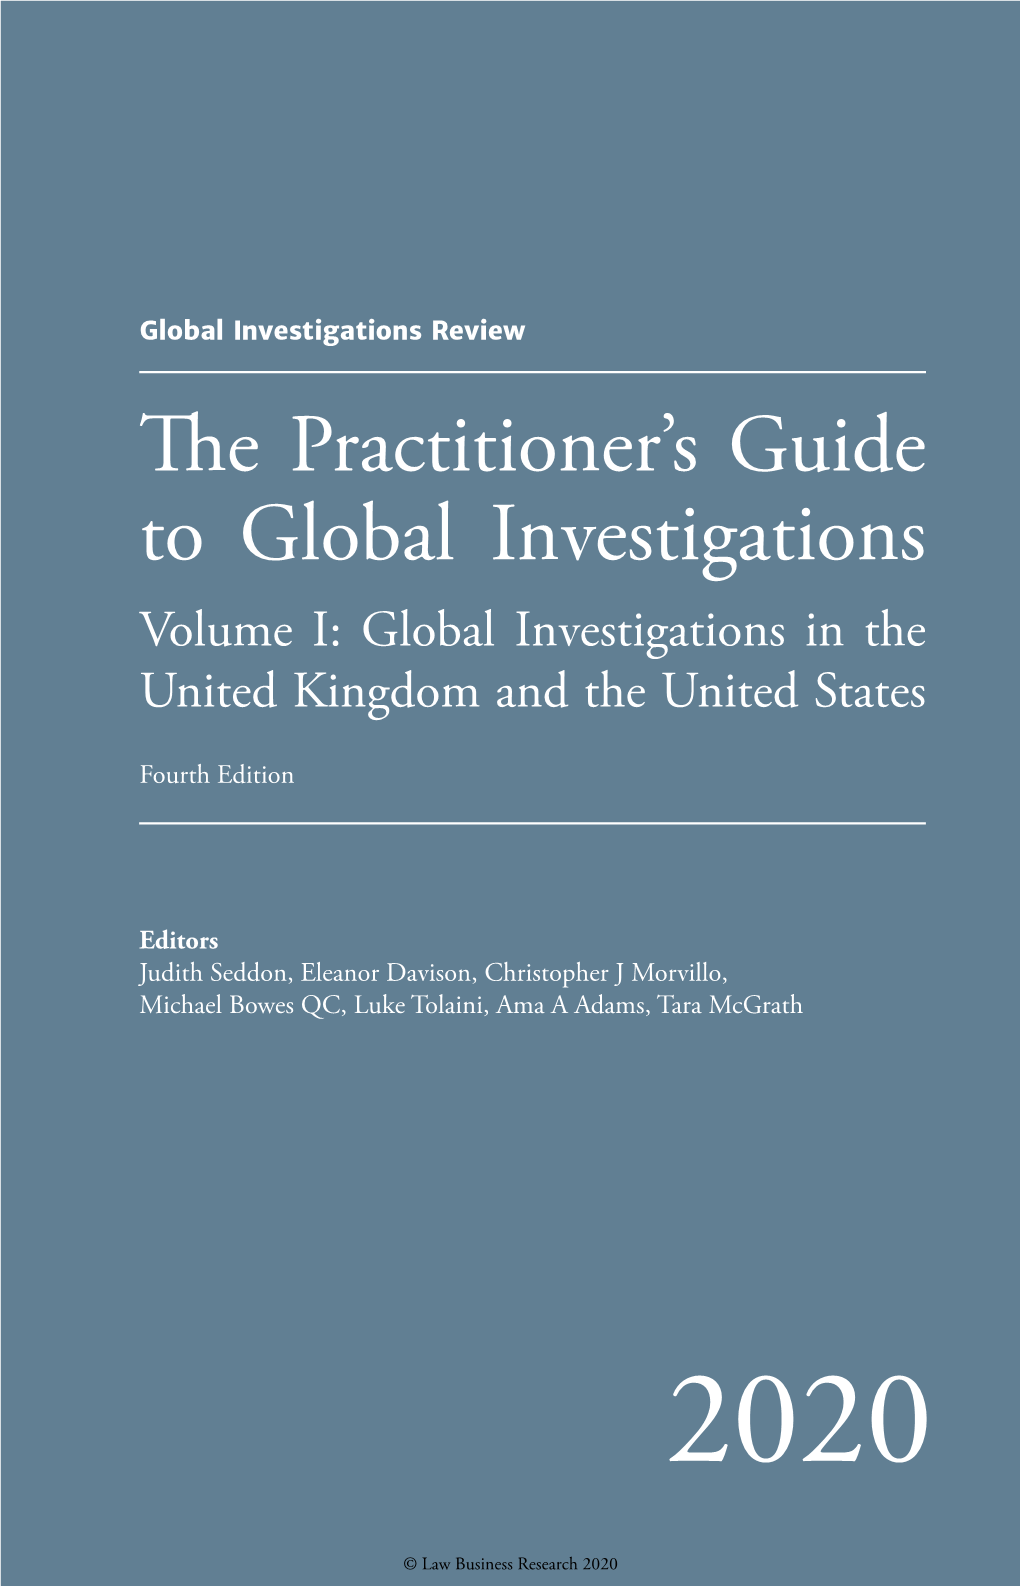 The Practitioner's Guide to Global Investigations